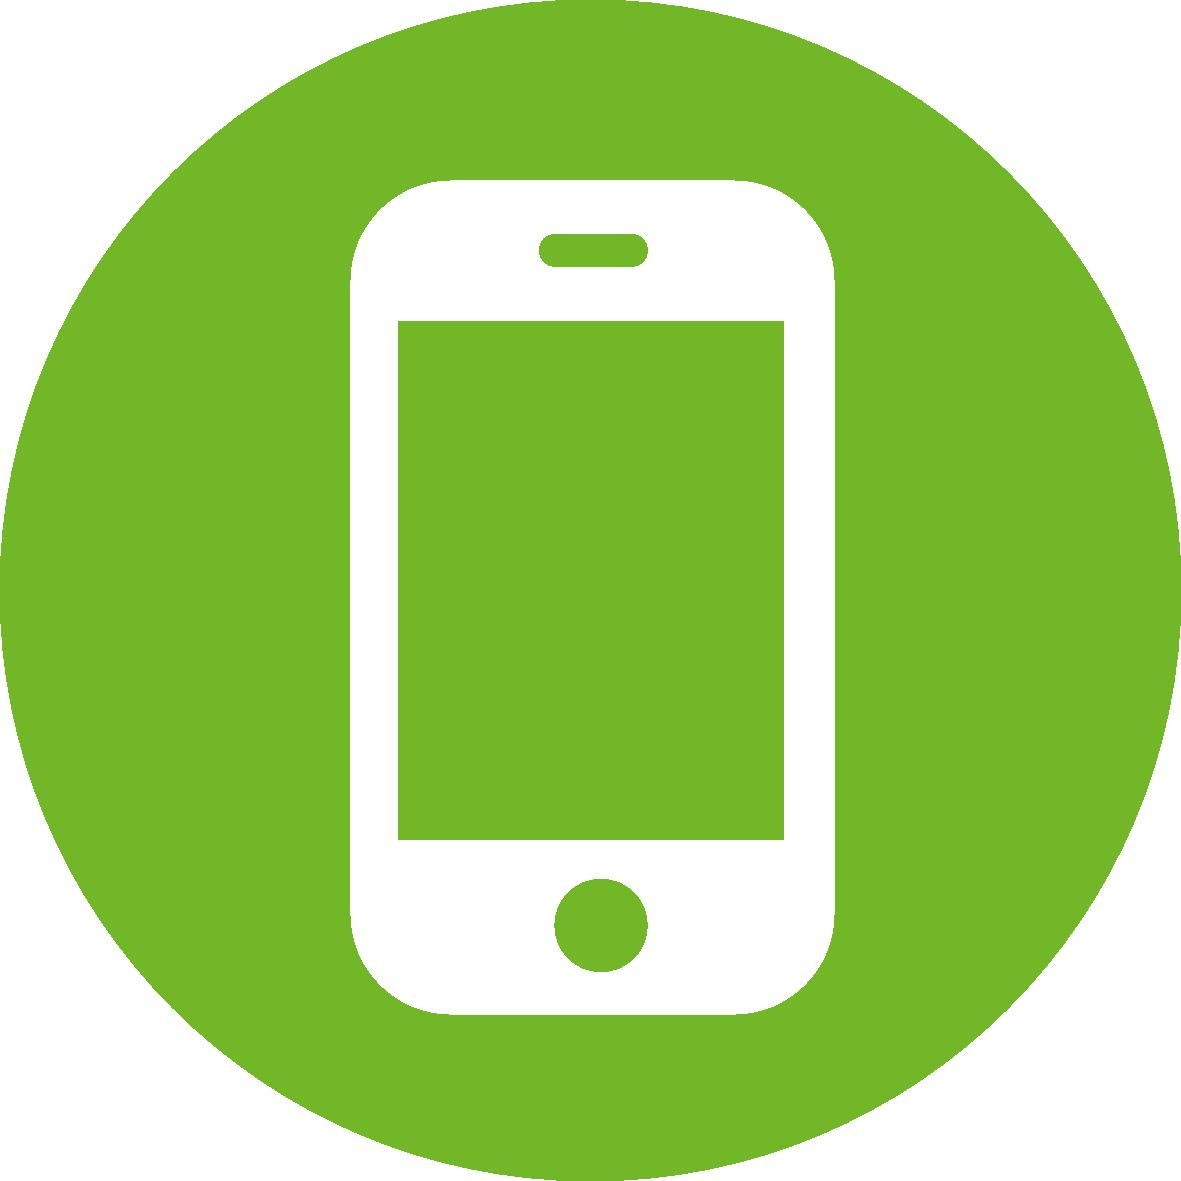 A white cell phone icon in a green circle.